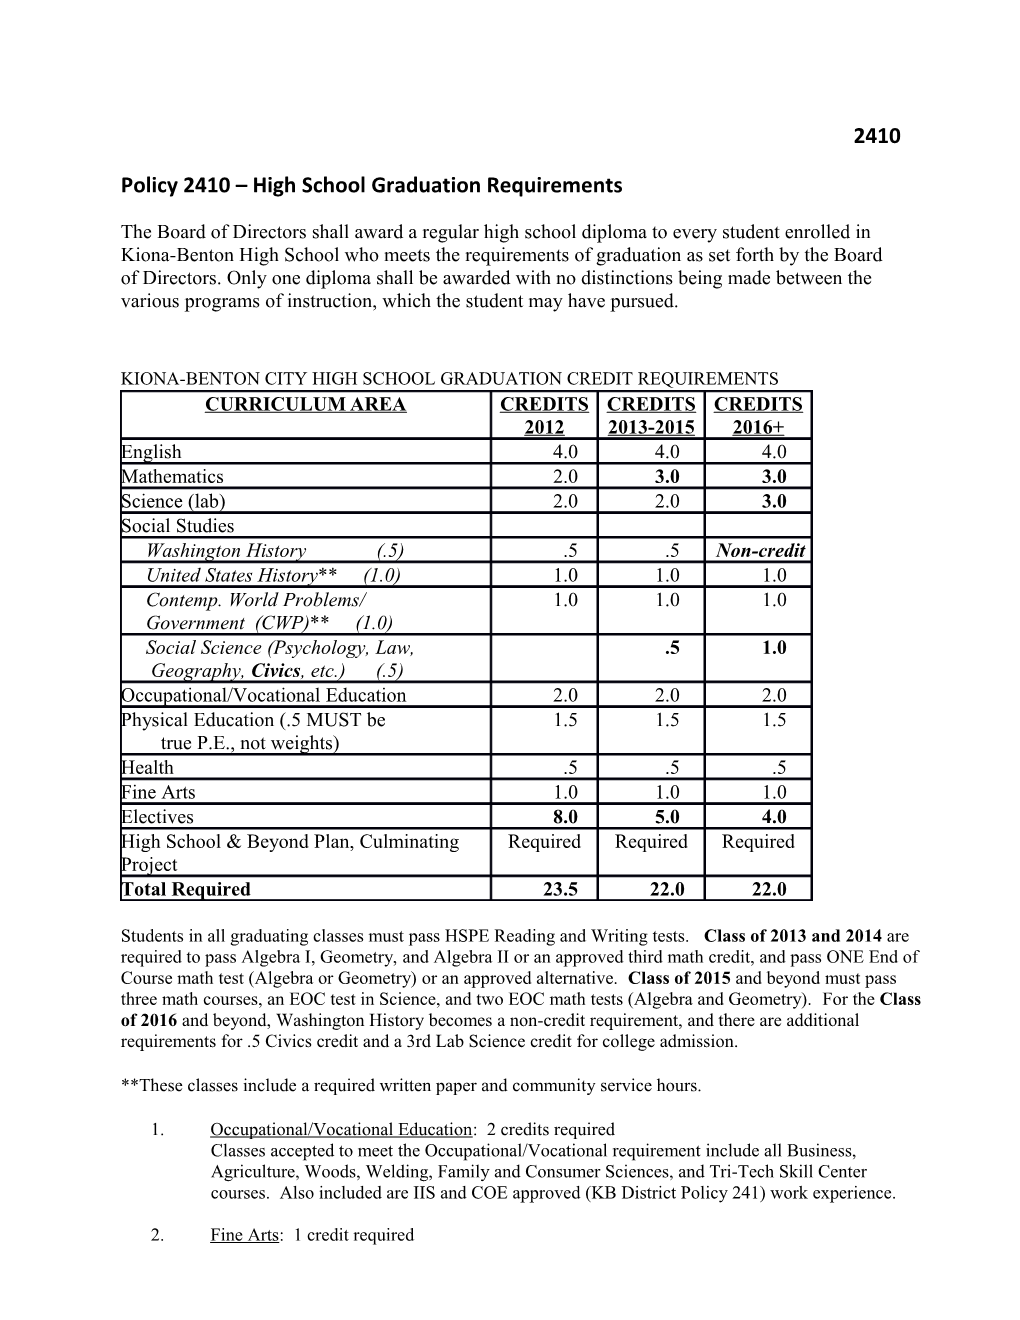 Policy 2410 High School Graduation Requirements